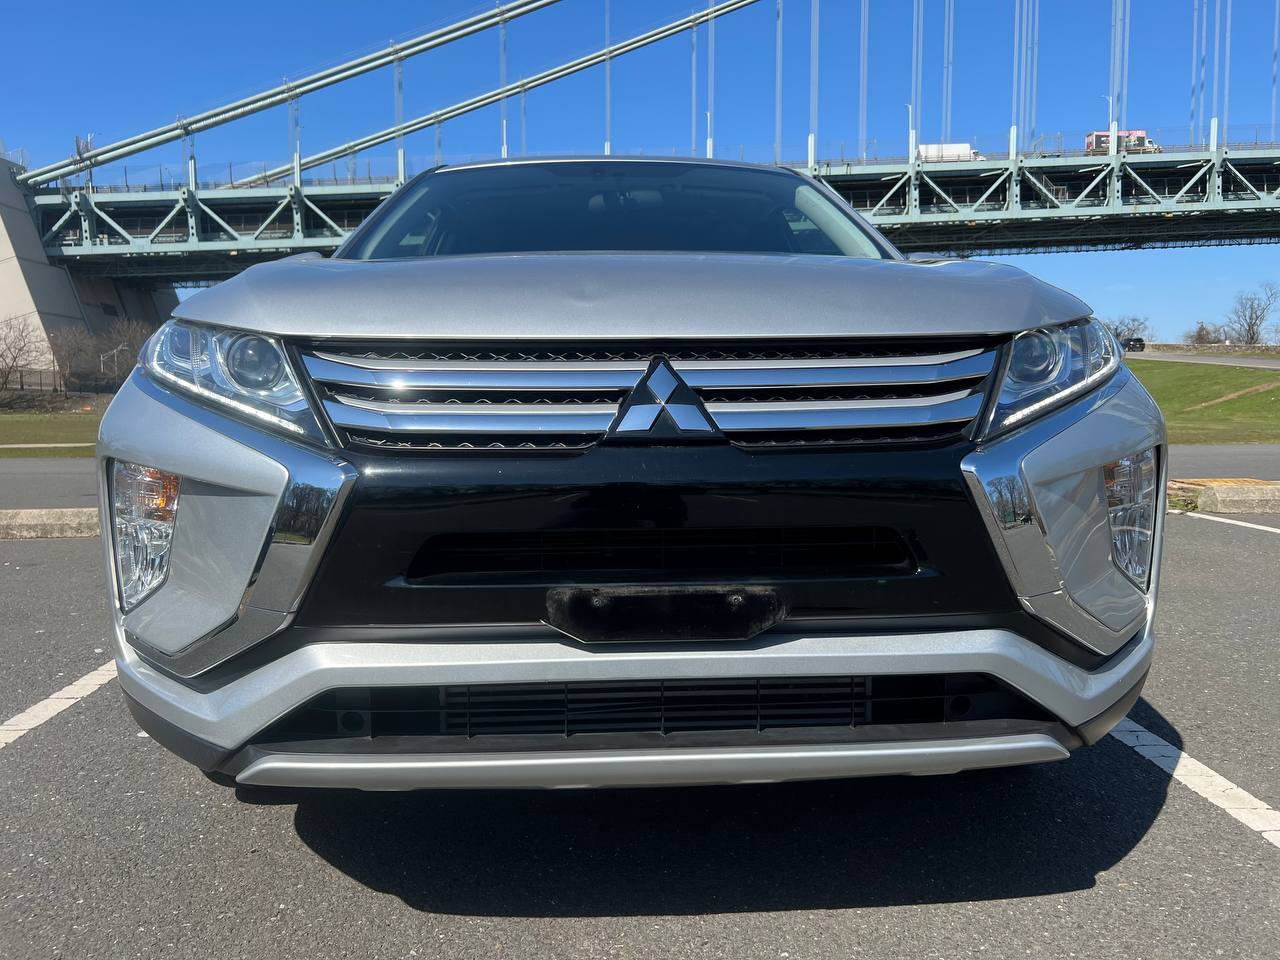 Used - Mitsubishi Eclipse Cross SE AWD Wagon for sale in Staten Island NY